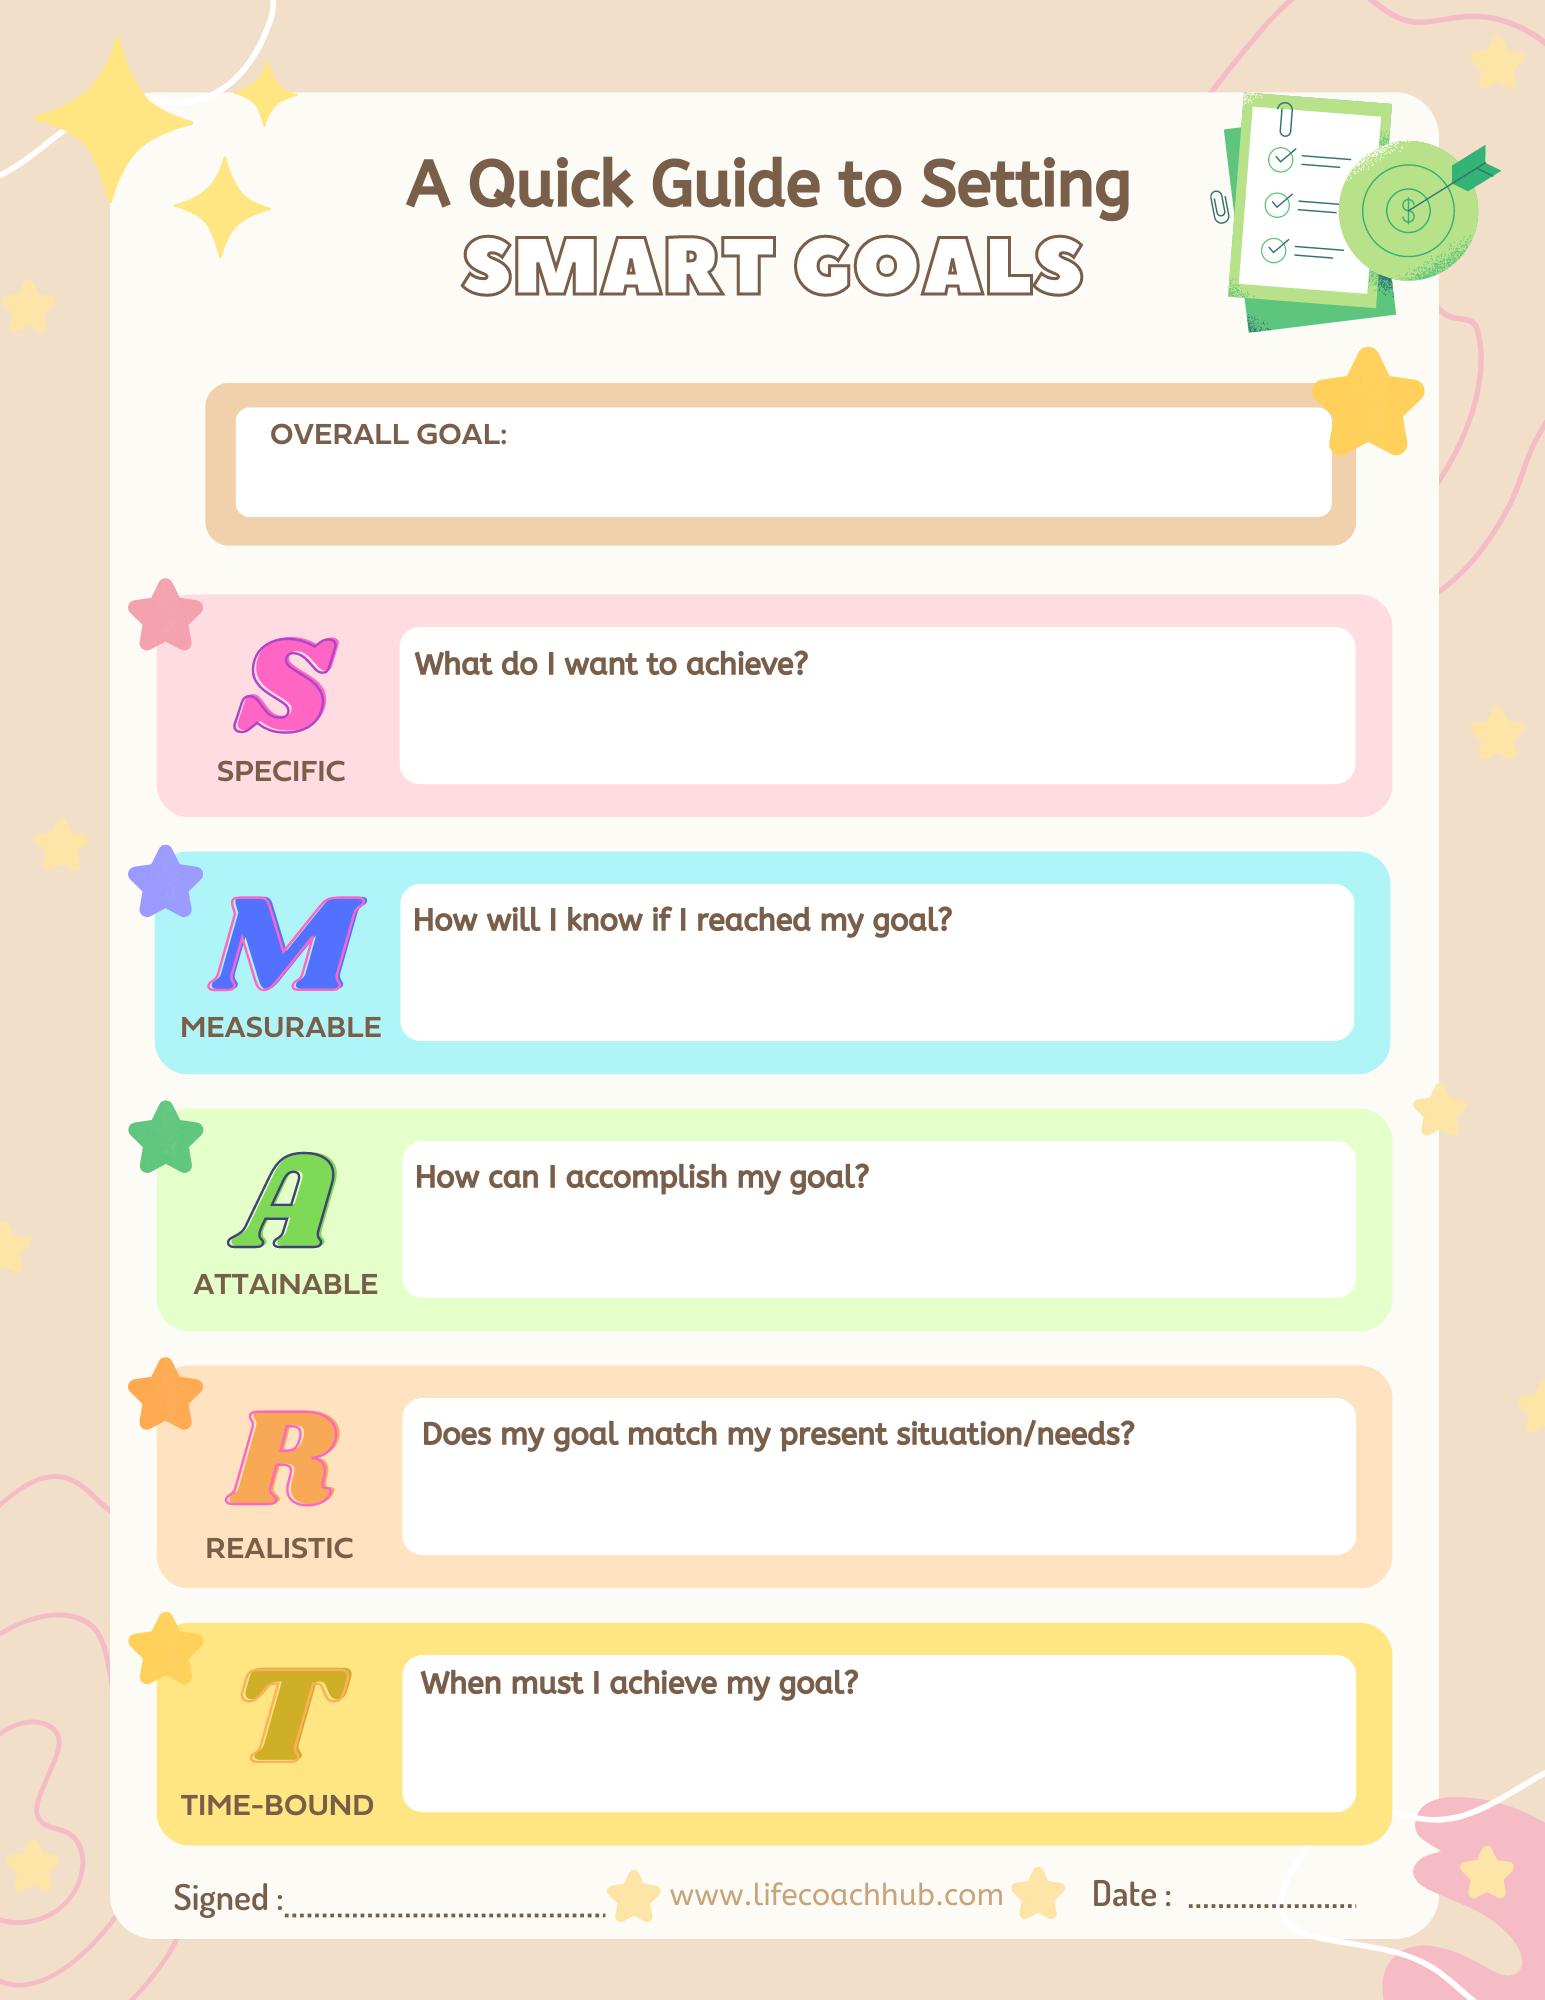 Guide to goal-setting smart goals